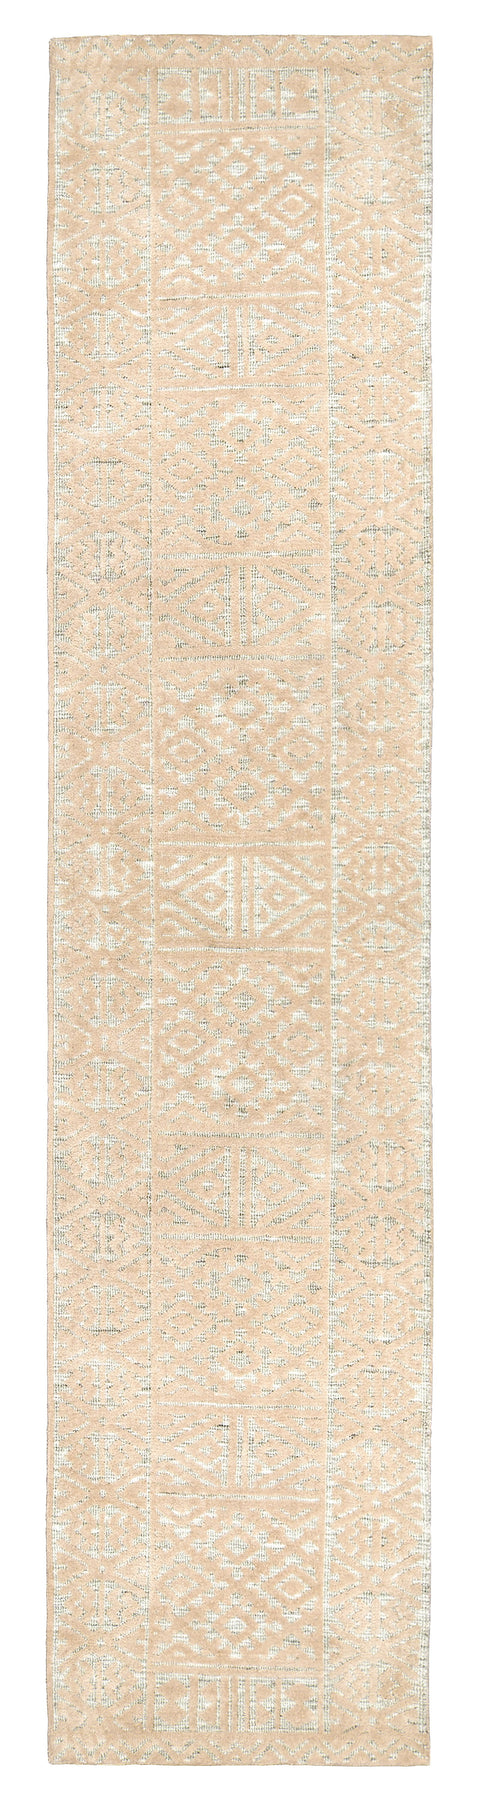 Kaia Hushed Green Grey and Beige Tribal Transitional Runner Rug